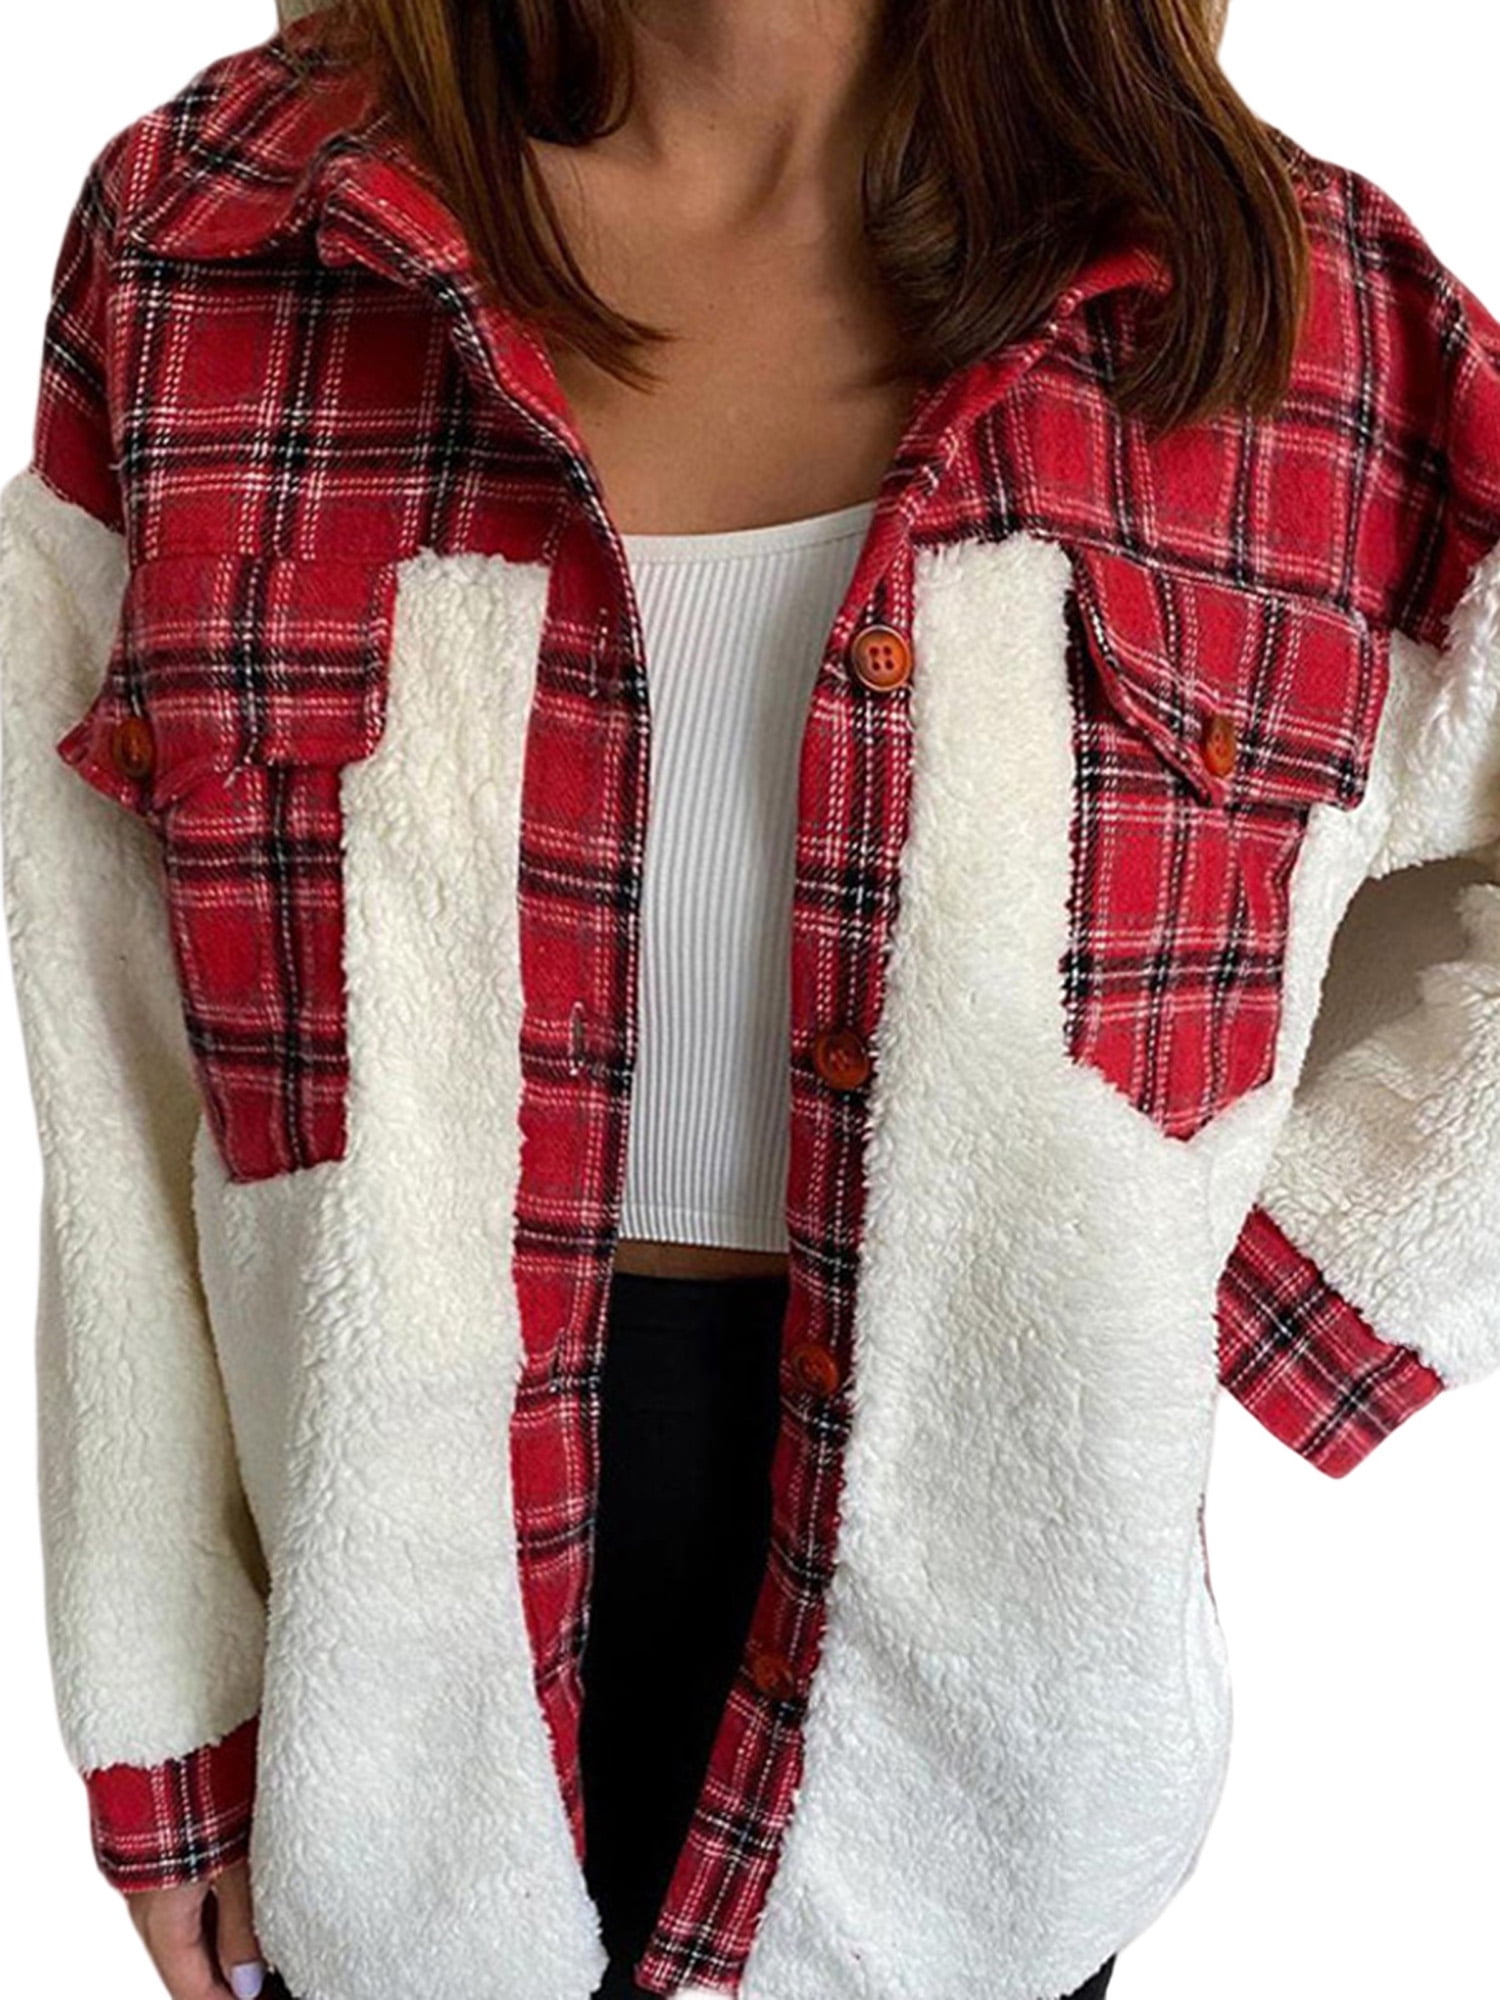 Eoeth Fashion Womens Casual Cardigan Lapel Plaid Long Sleeves T-Shirt Blouse Tops Loose Wild Button Outwear Coat Shirts 